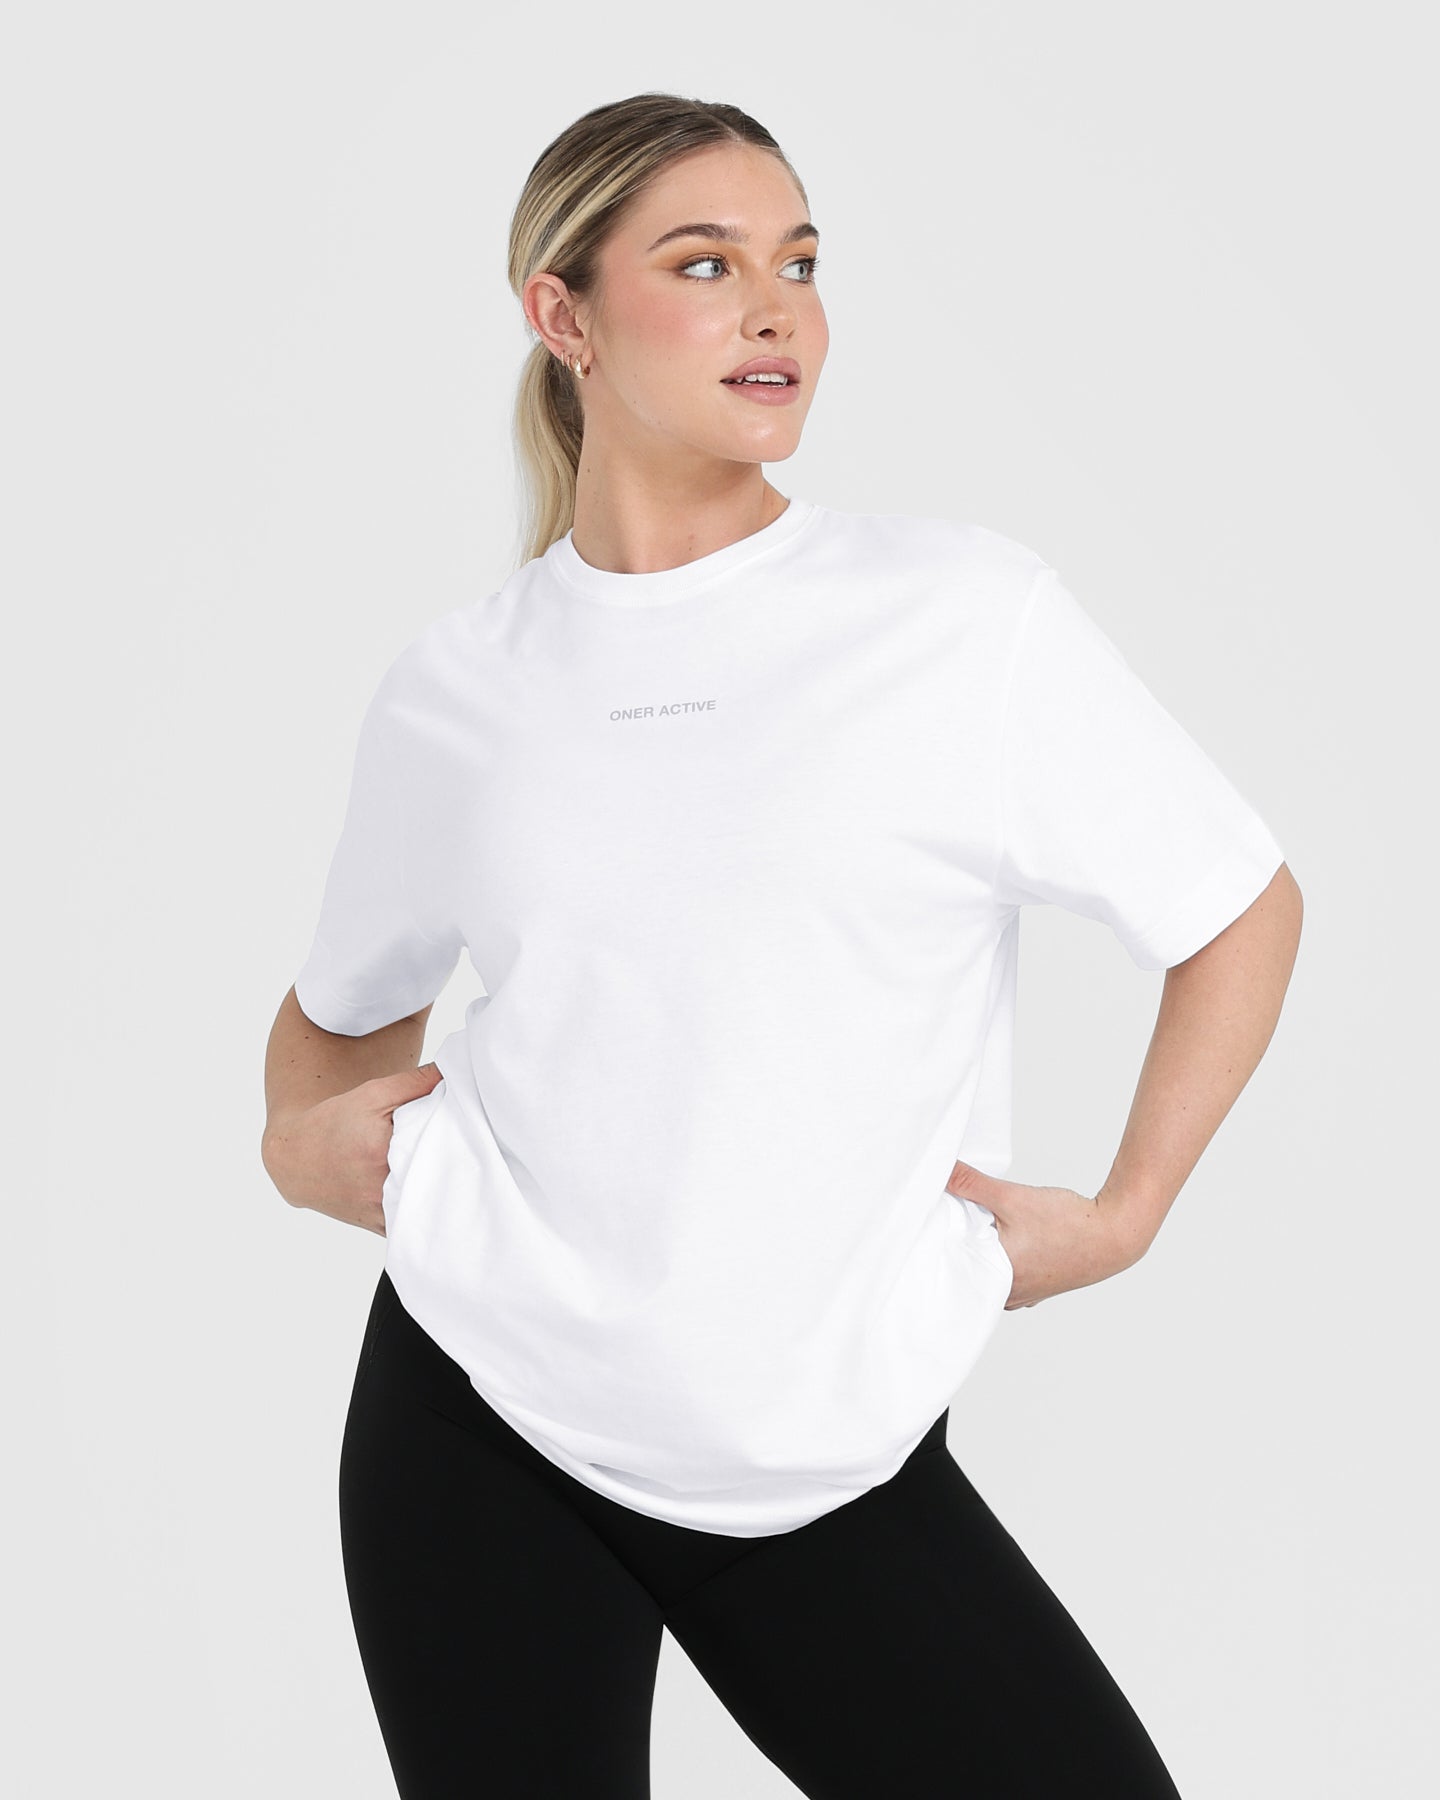 White Oversized T-Shirt Women\'s - Soft Touch Cotton | Oner Active